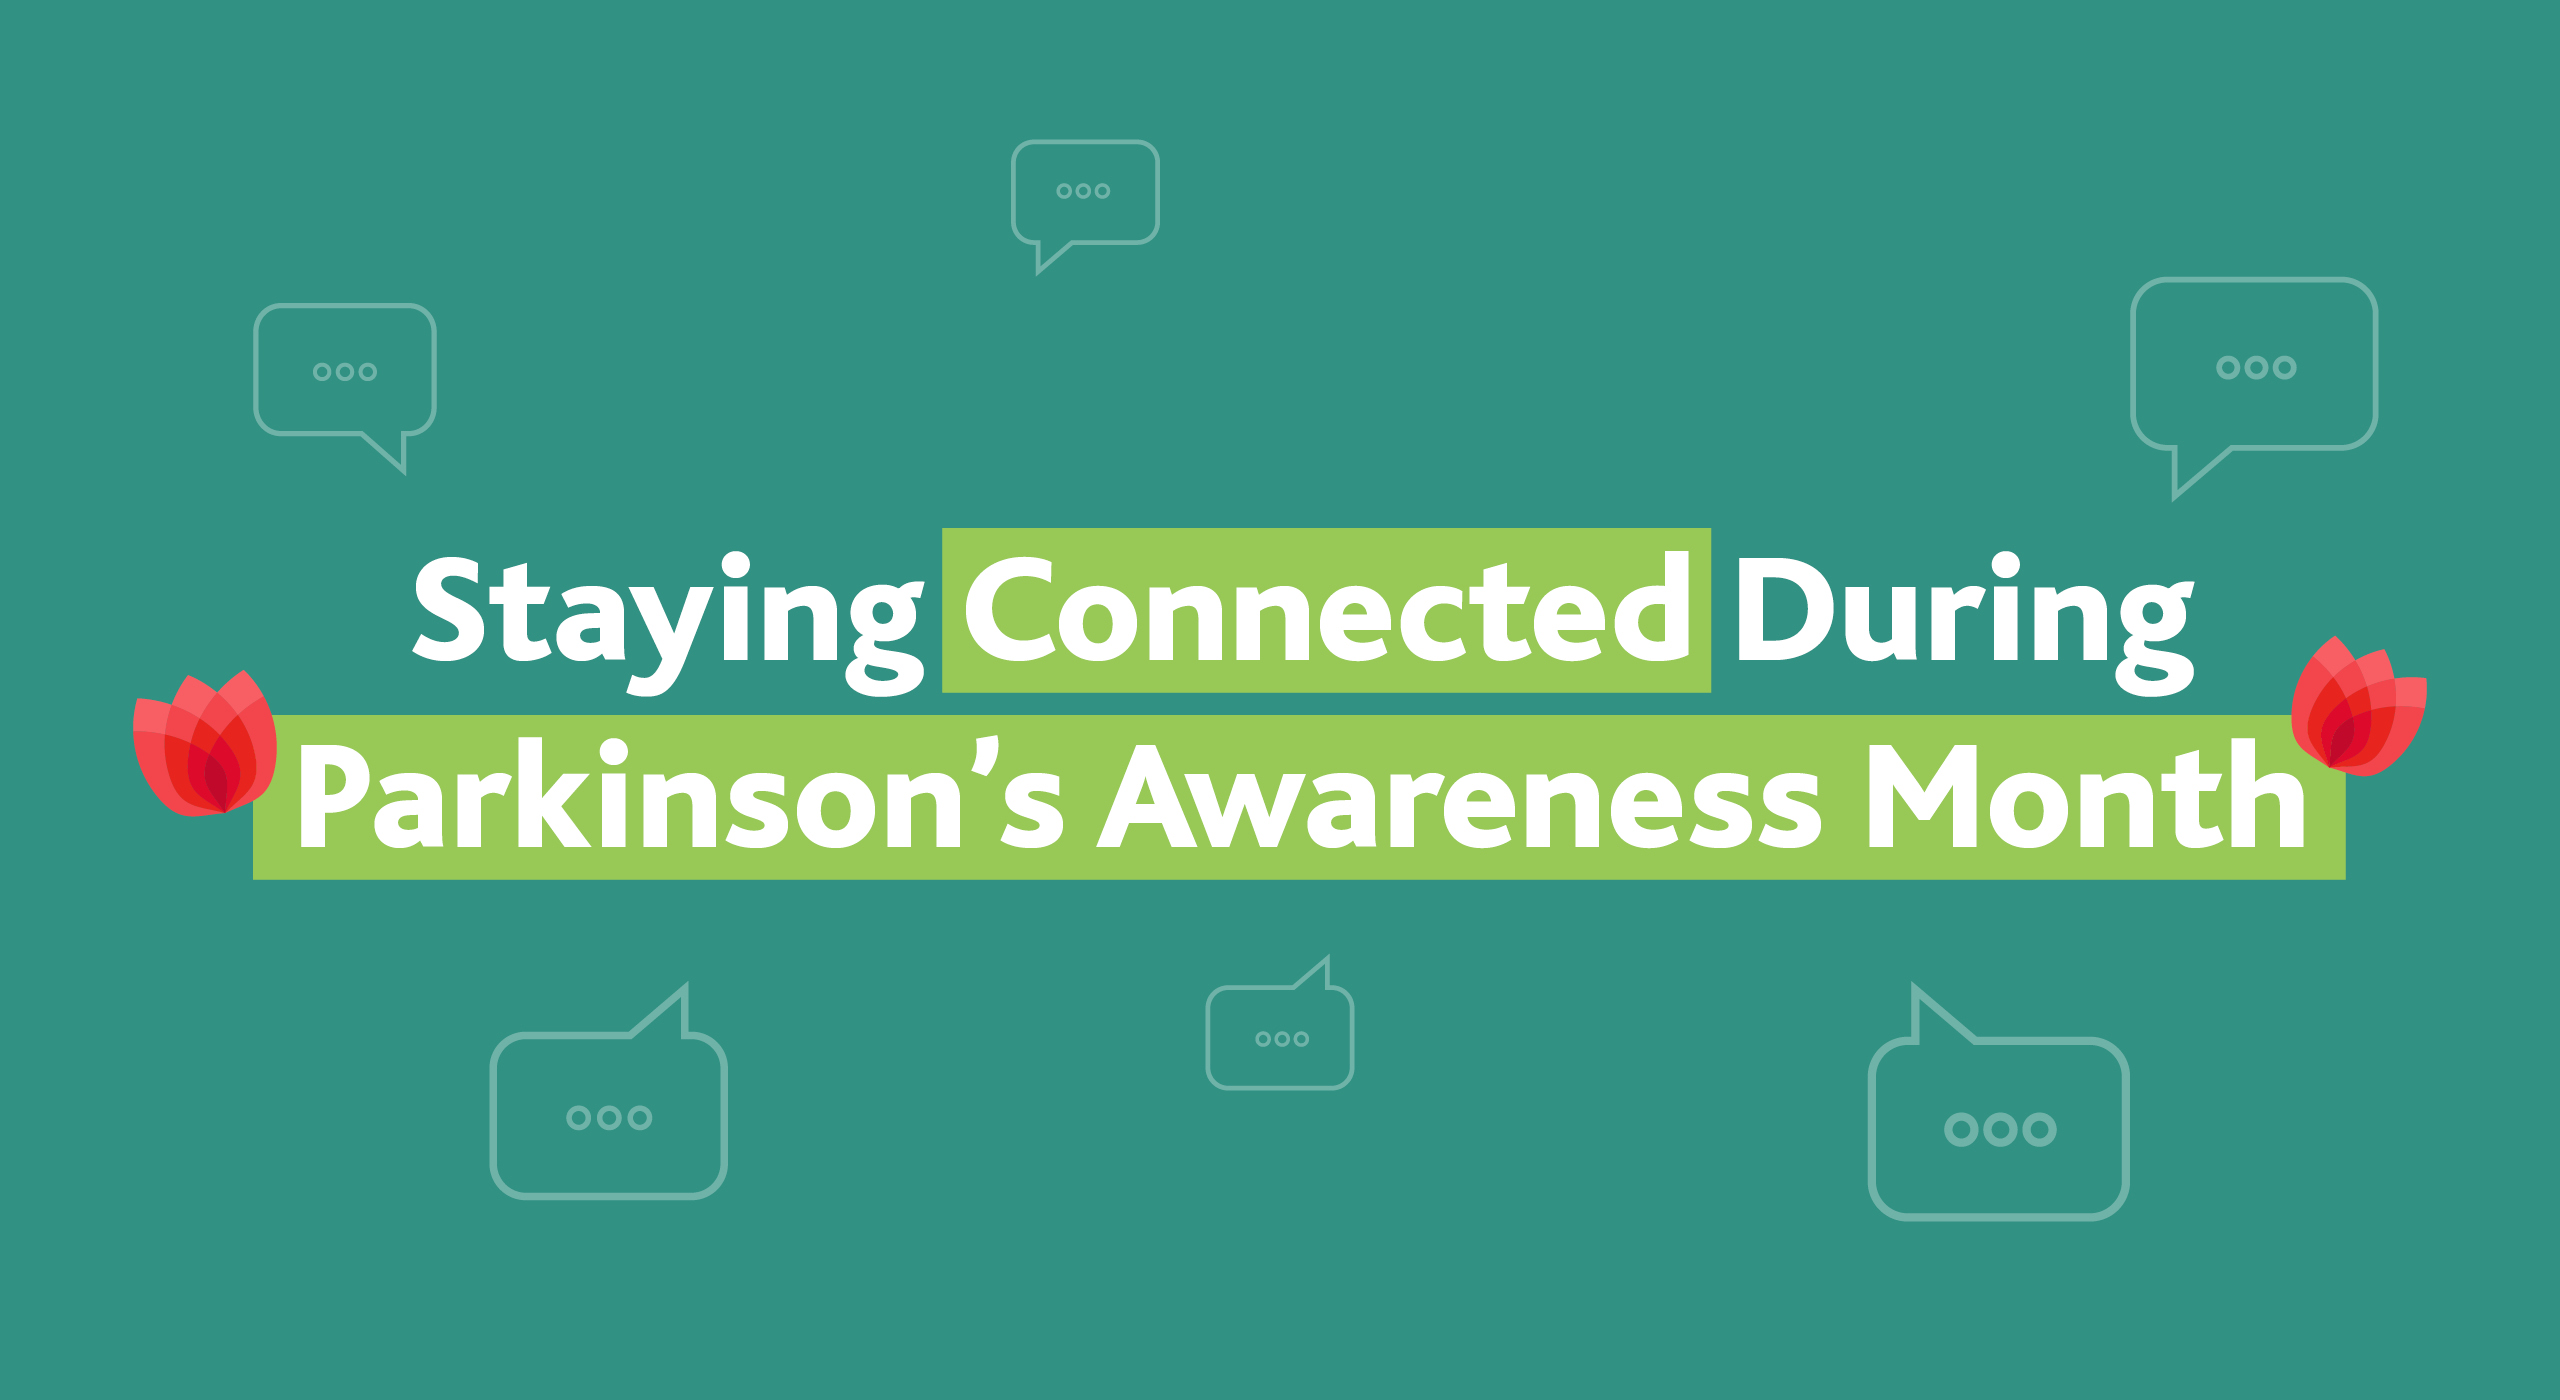 Parkinson’s Awareness Month 2020: Finding Hope and Social Connection Amidst Social Distancing